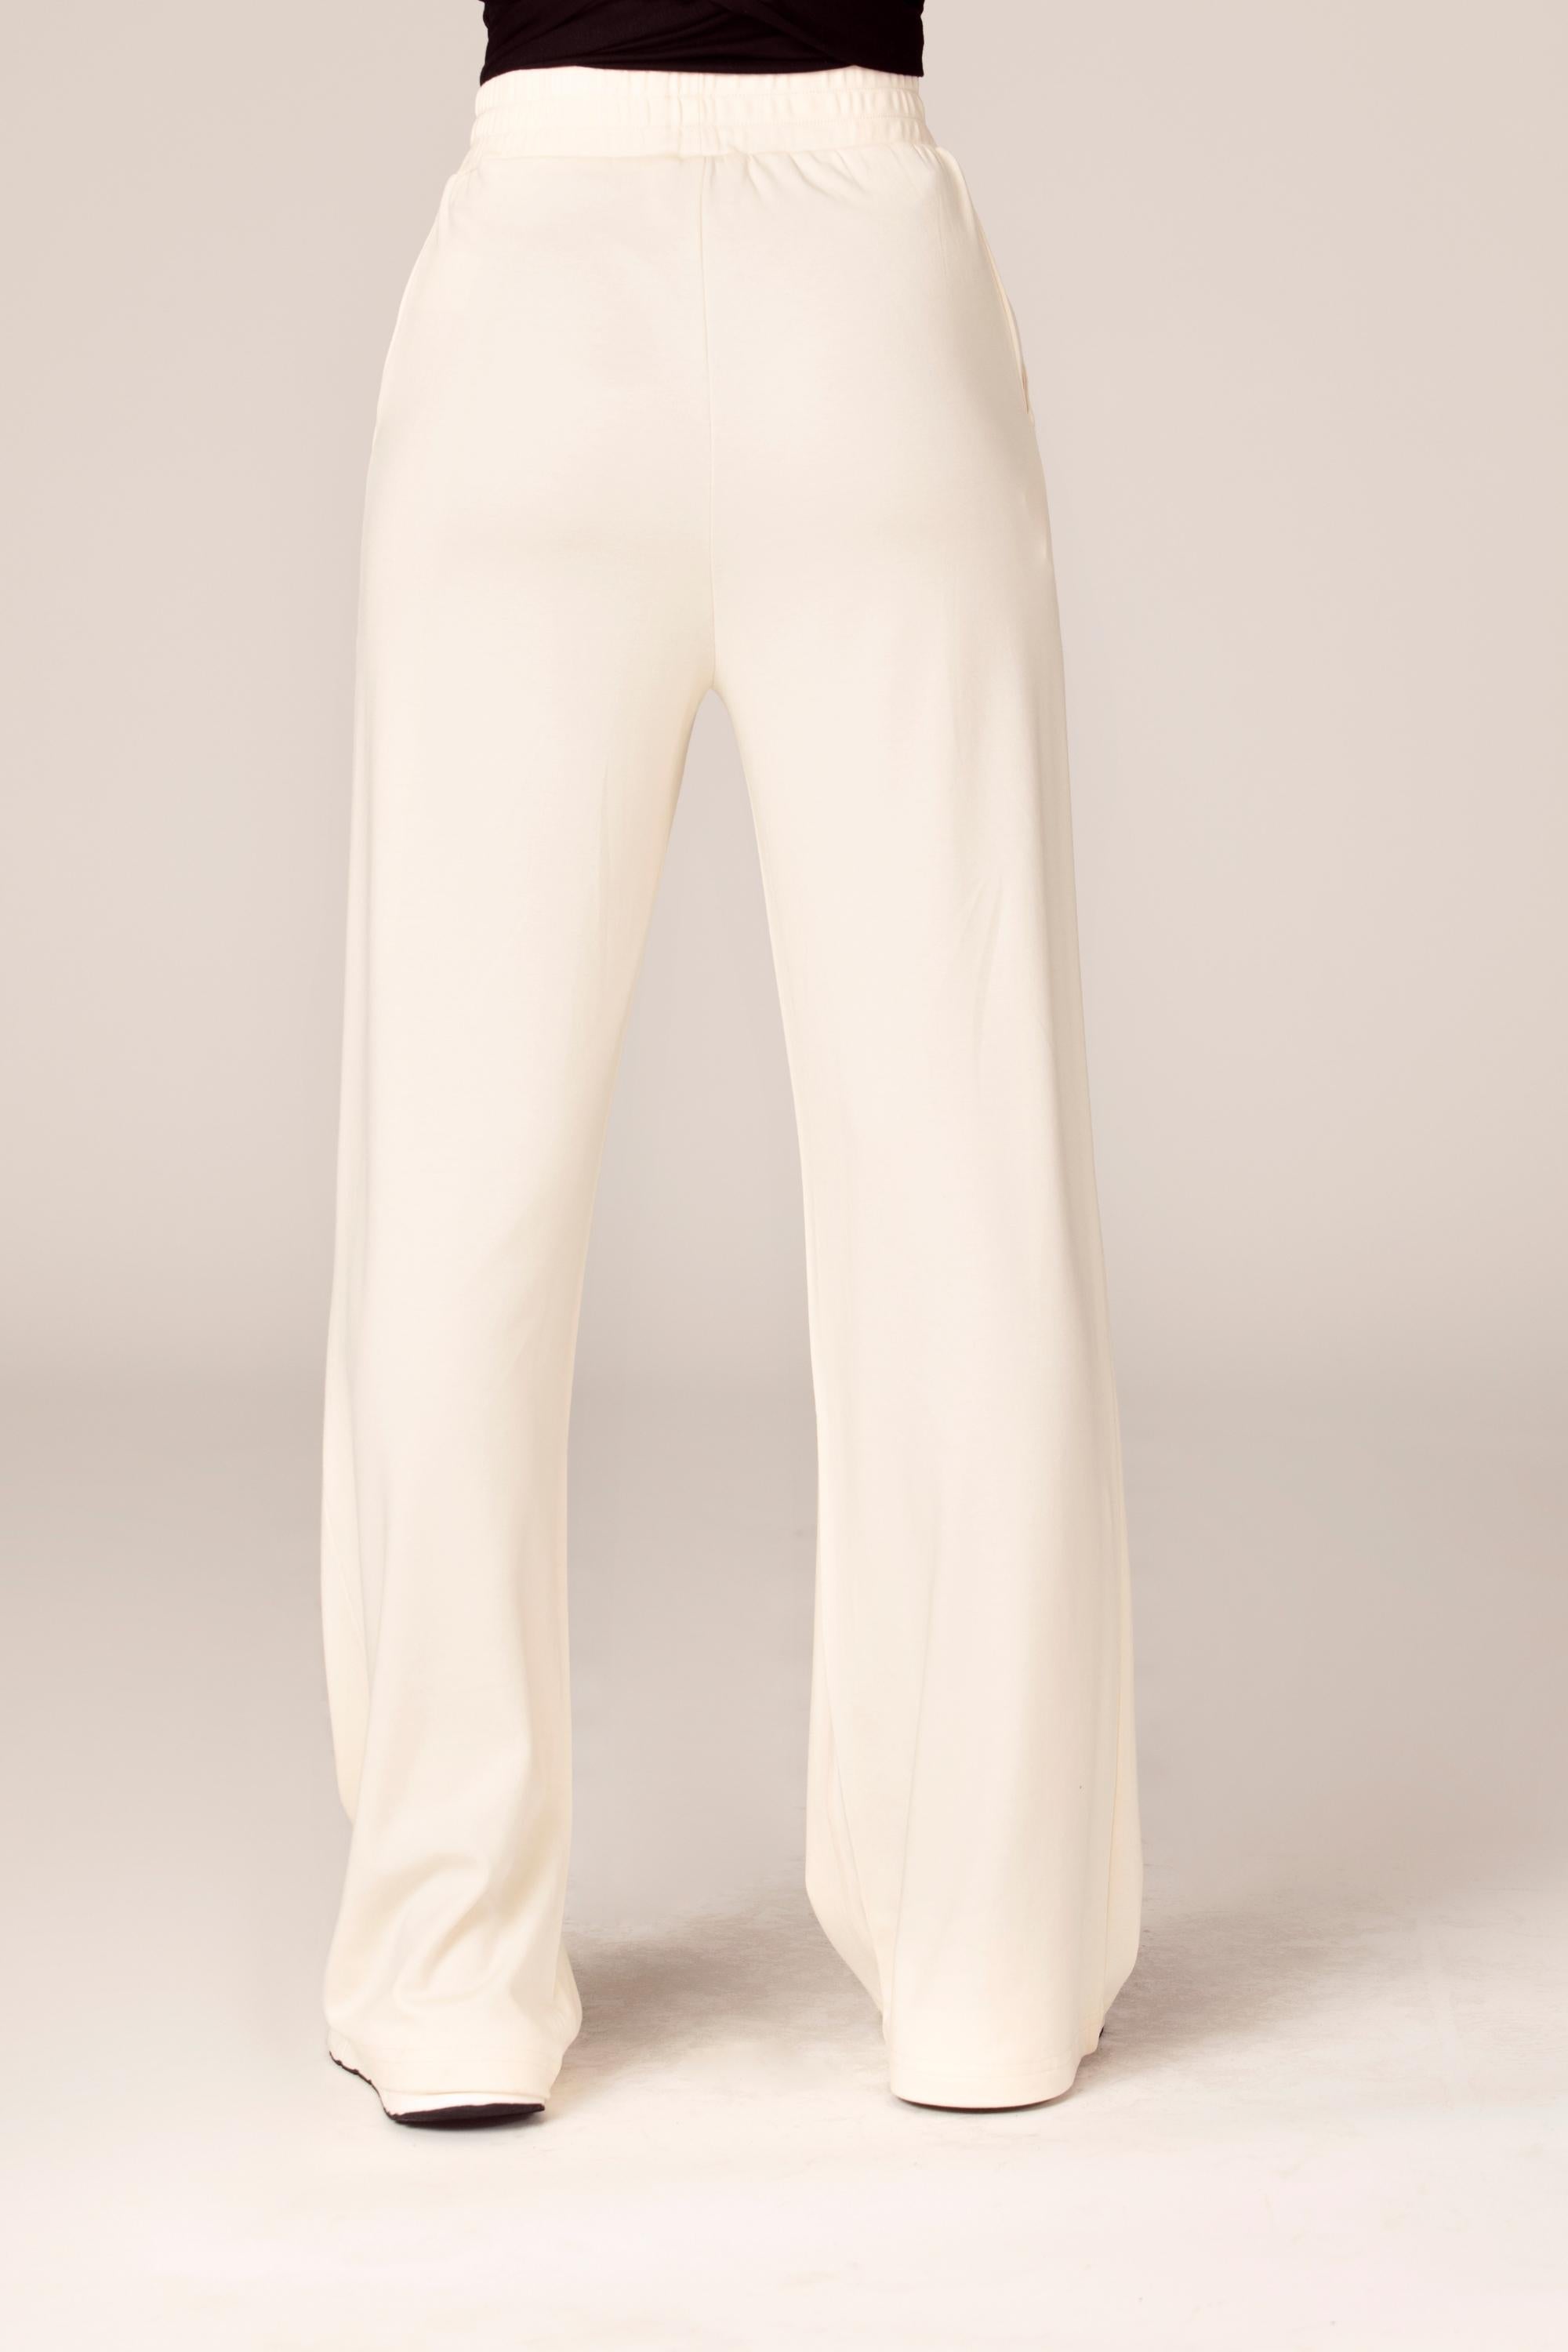 White Wide-Leg Lounge Pants by Margaret Howell on Sale